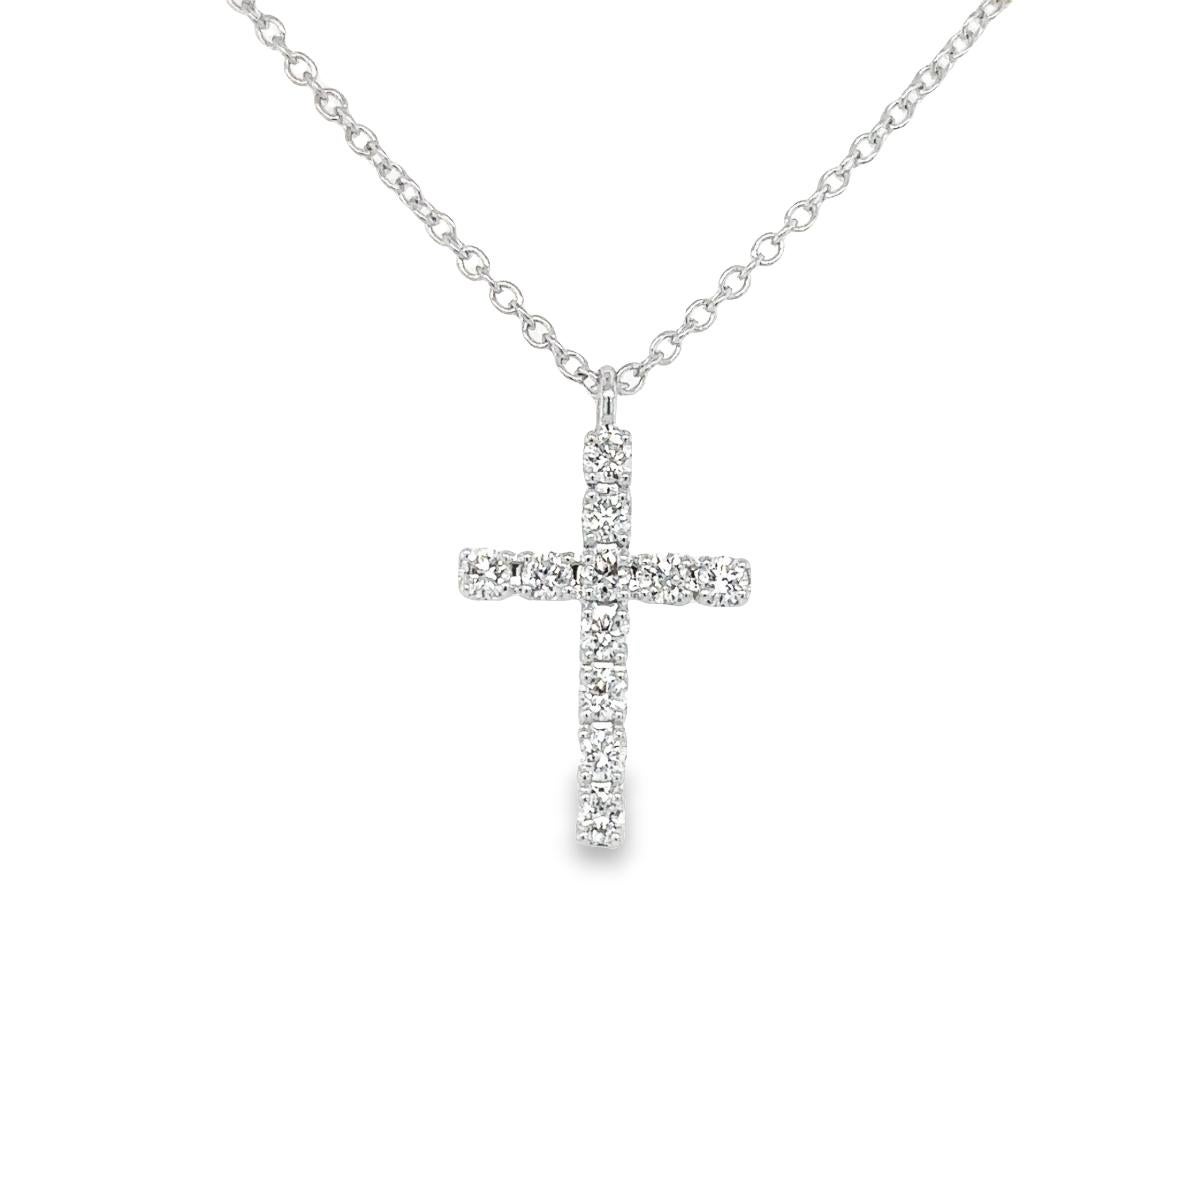 TIMELESS Necklace Cross in white gold 18Kt 3.25 gr with 11 Round Diamonds G Color VS Clarity in total 0.38 ct

The Timeless Collection was inspired by the endless elegance and sophistication of classic high-jewelry, eternising it’s beauty and